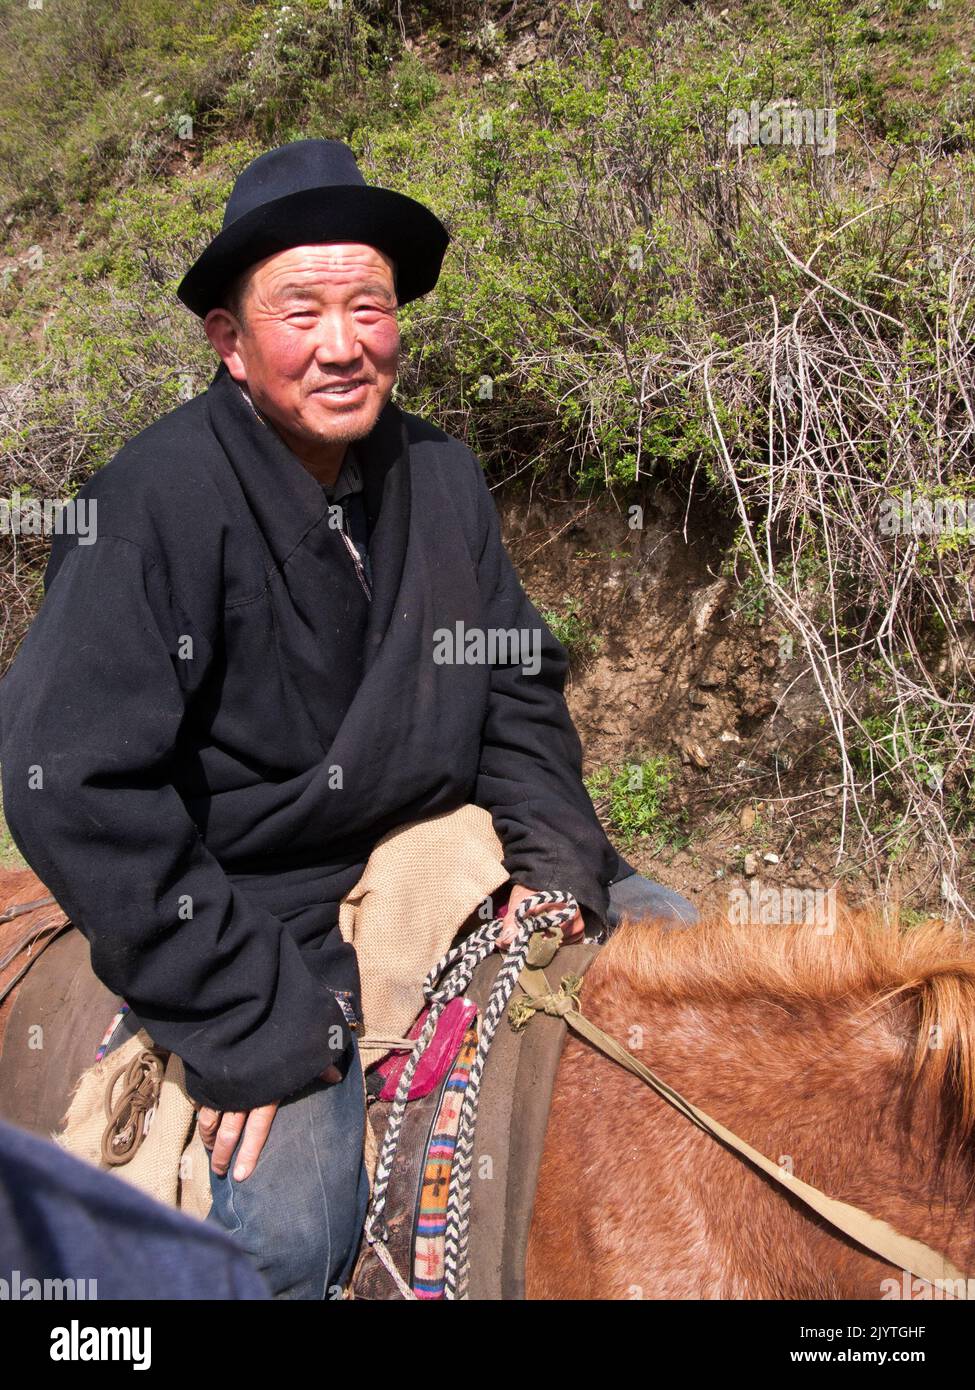 Horse trekking pony ride for Western and European holidaymaker, tourists and visitors given by Tibetan horseman / man / ethnic people of Tibet, resident or local to the walled ancient Chinese town of Songpan in northern Sichuan province, China. (126) Stock Photo